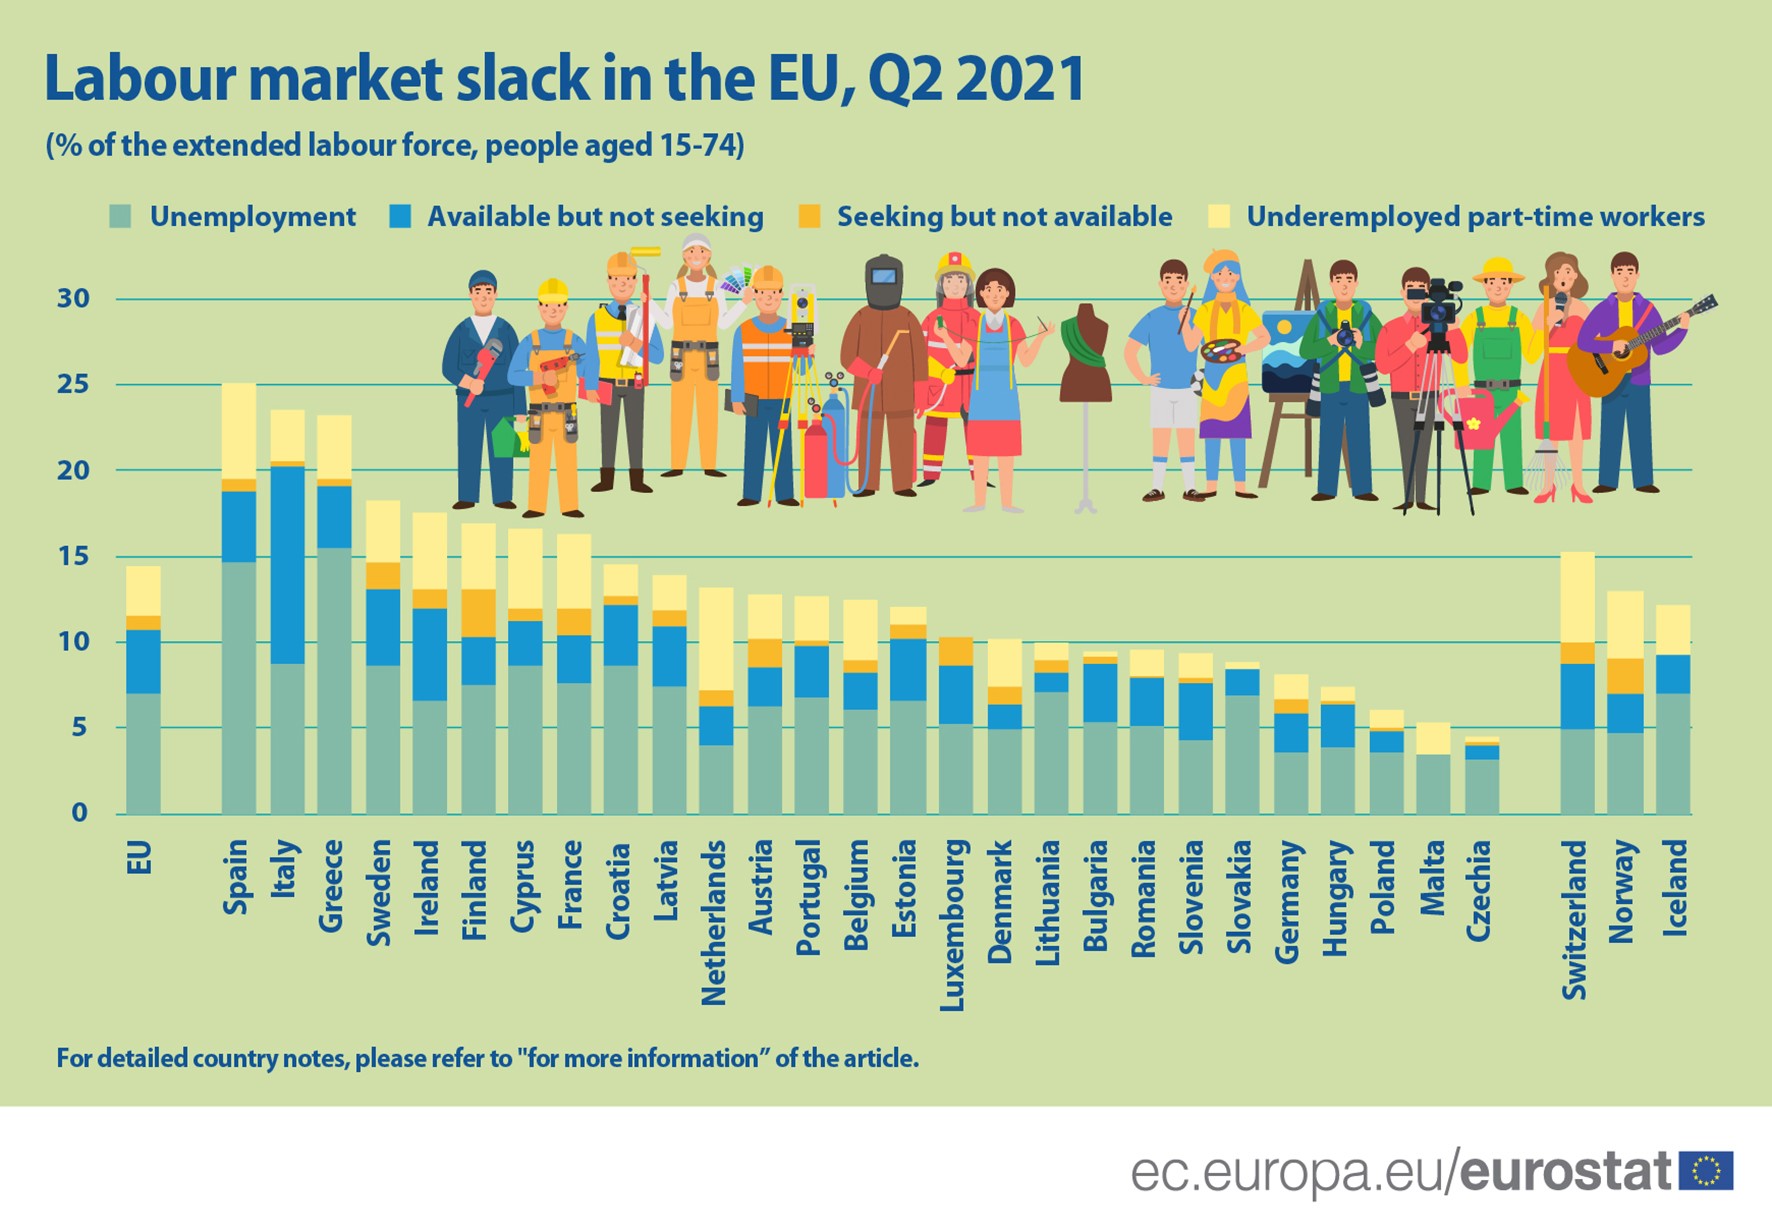 Stacked bar graph: Labour market slack in EU Member States and EFTA countries, Q2 2021, in % of the extended labour force, people aged 15-74. The indicators are unemployment, available but not seeking, seeking but not available and underemployed part-time workers.